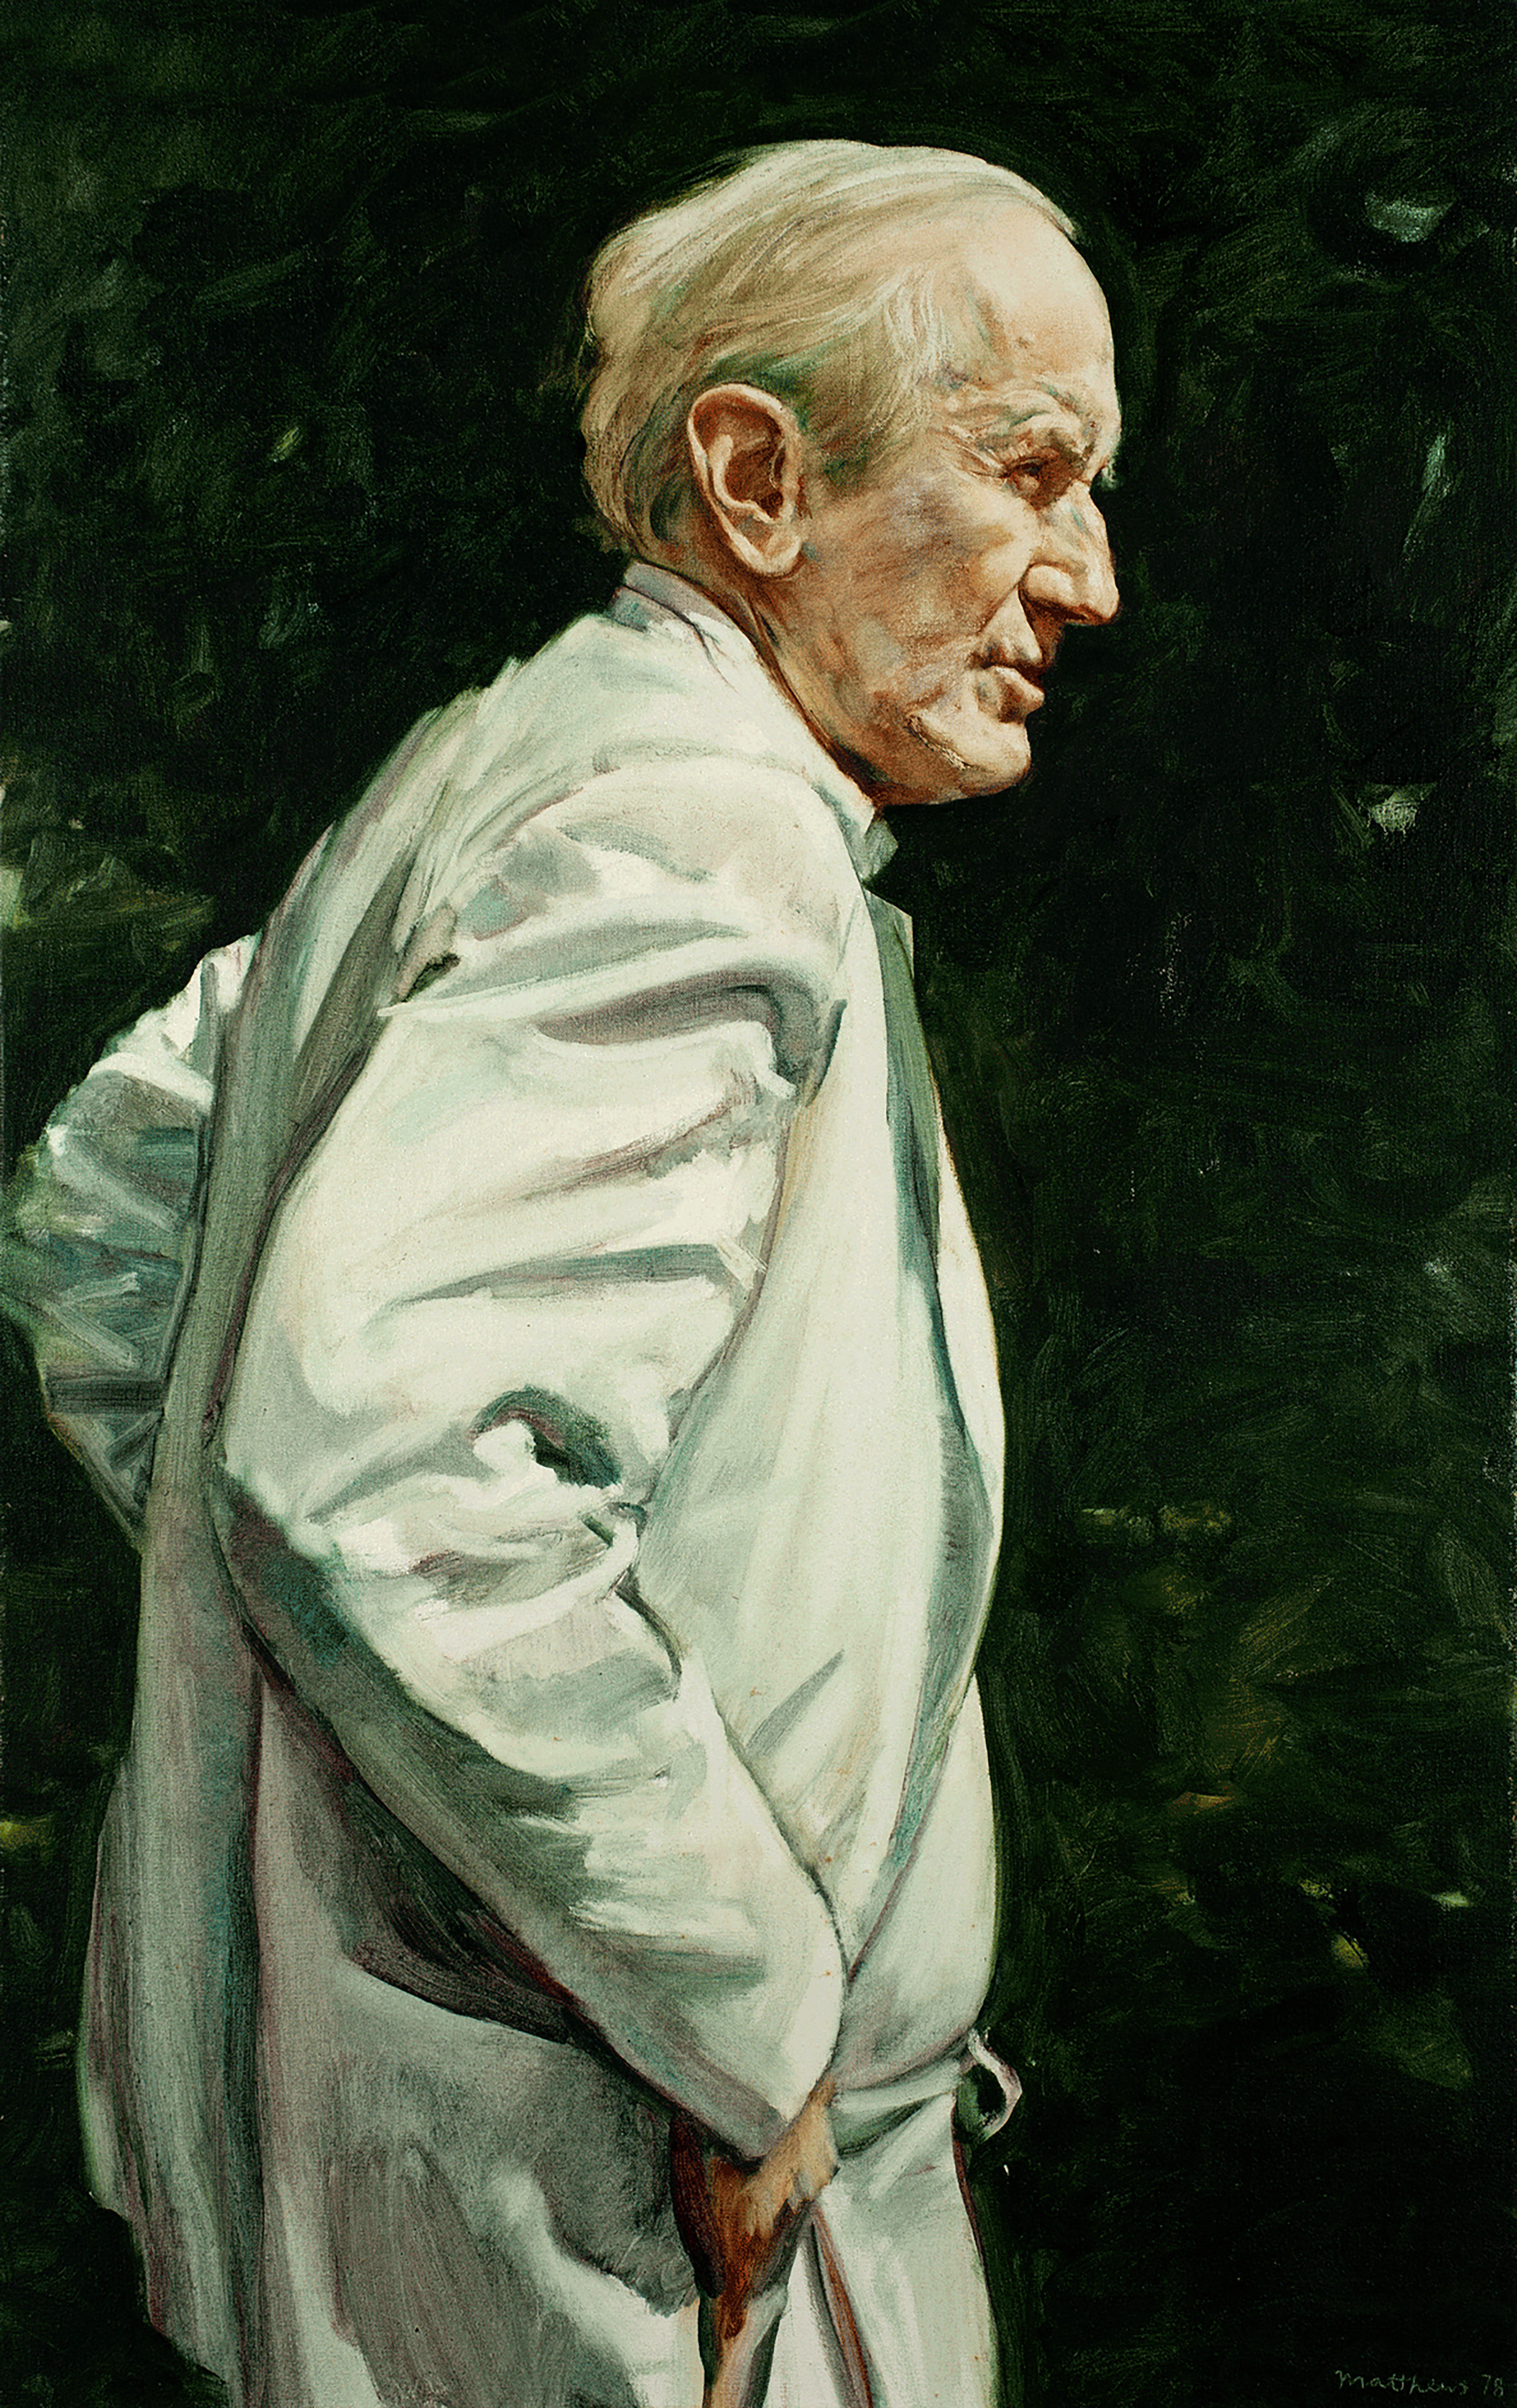  My Father, Talking in Sunlight; oil on canvas,  inches 